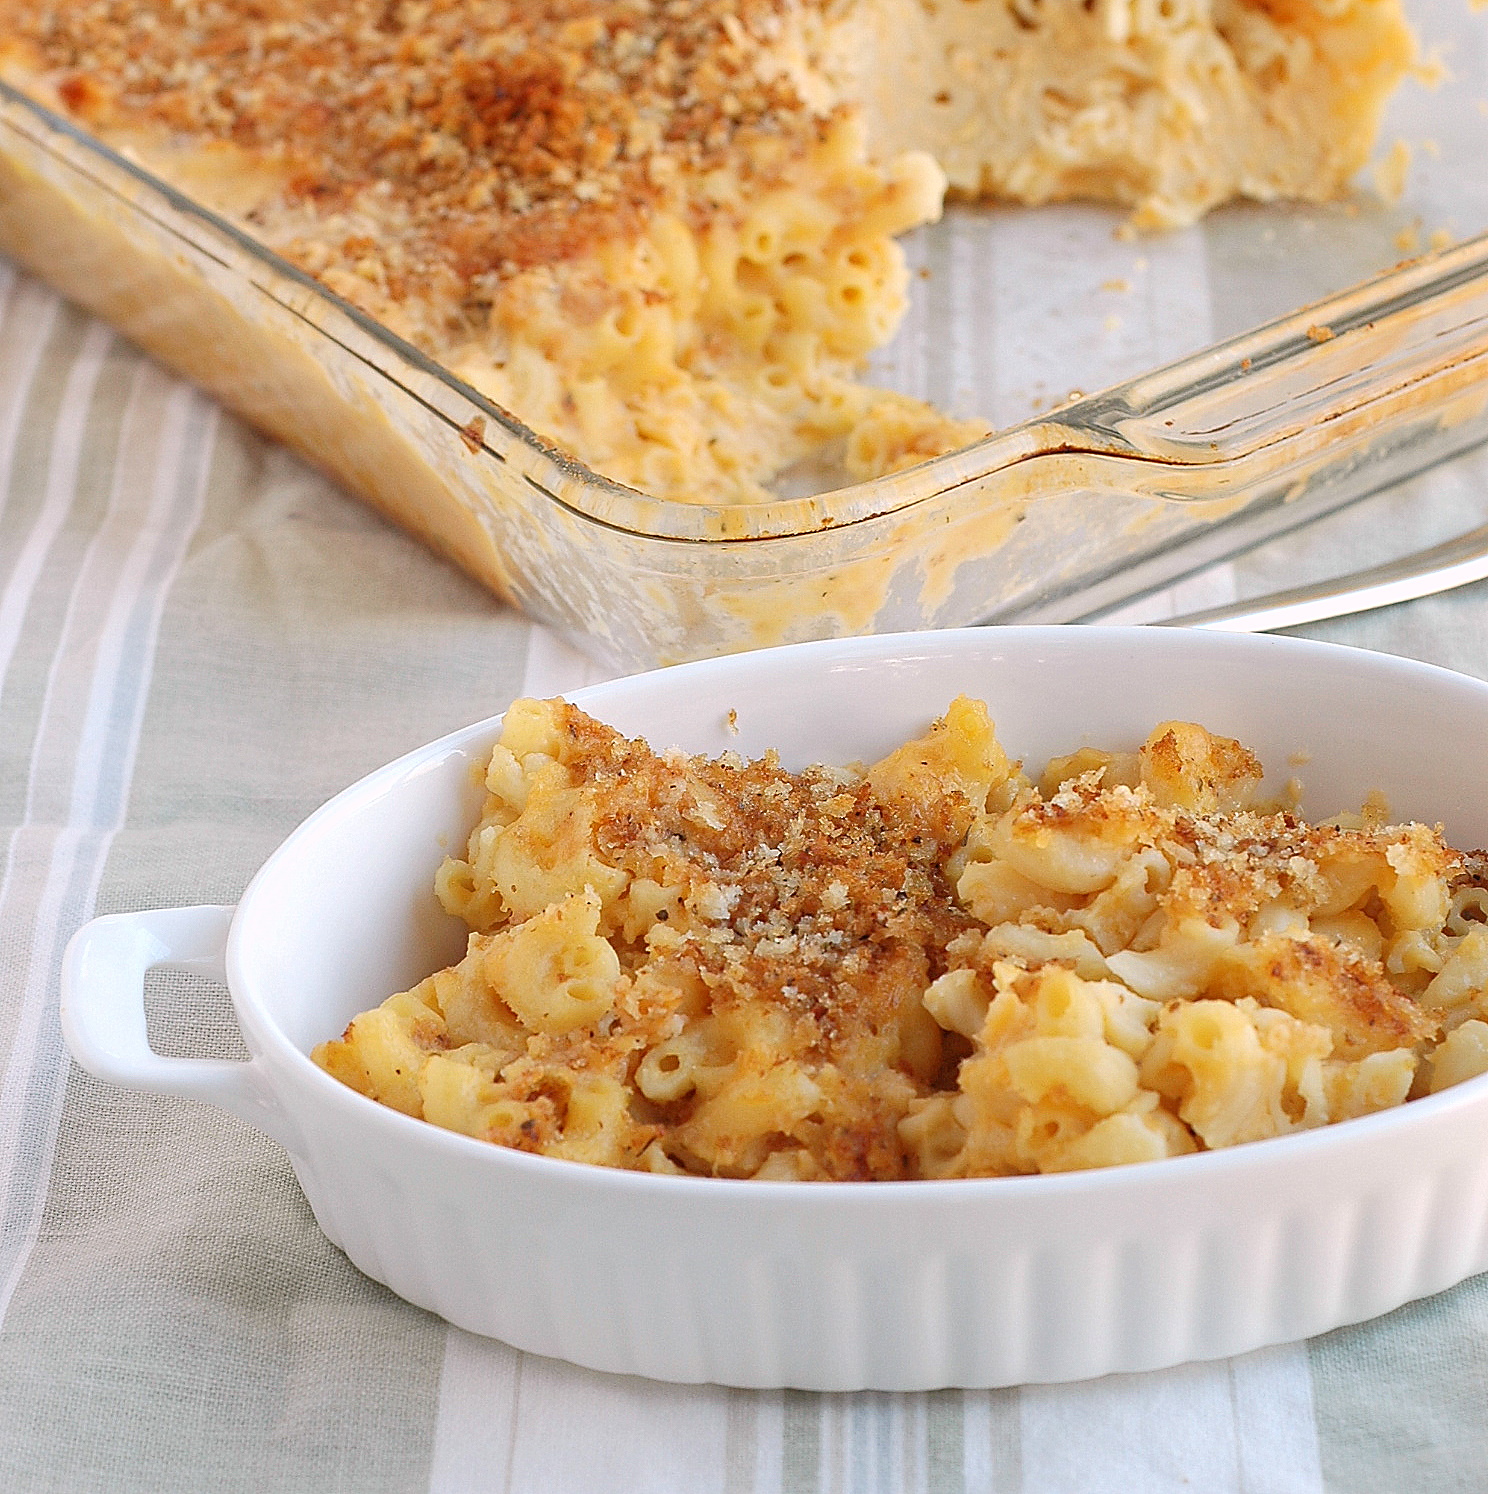 How To Make Baked Mac And Cheese With Breadcrumbs